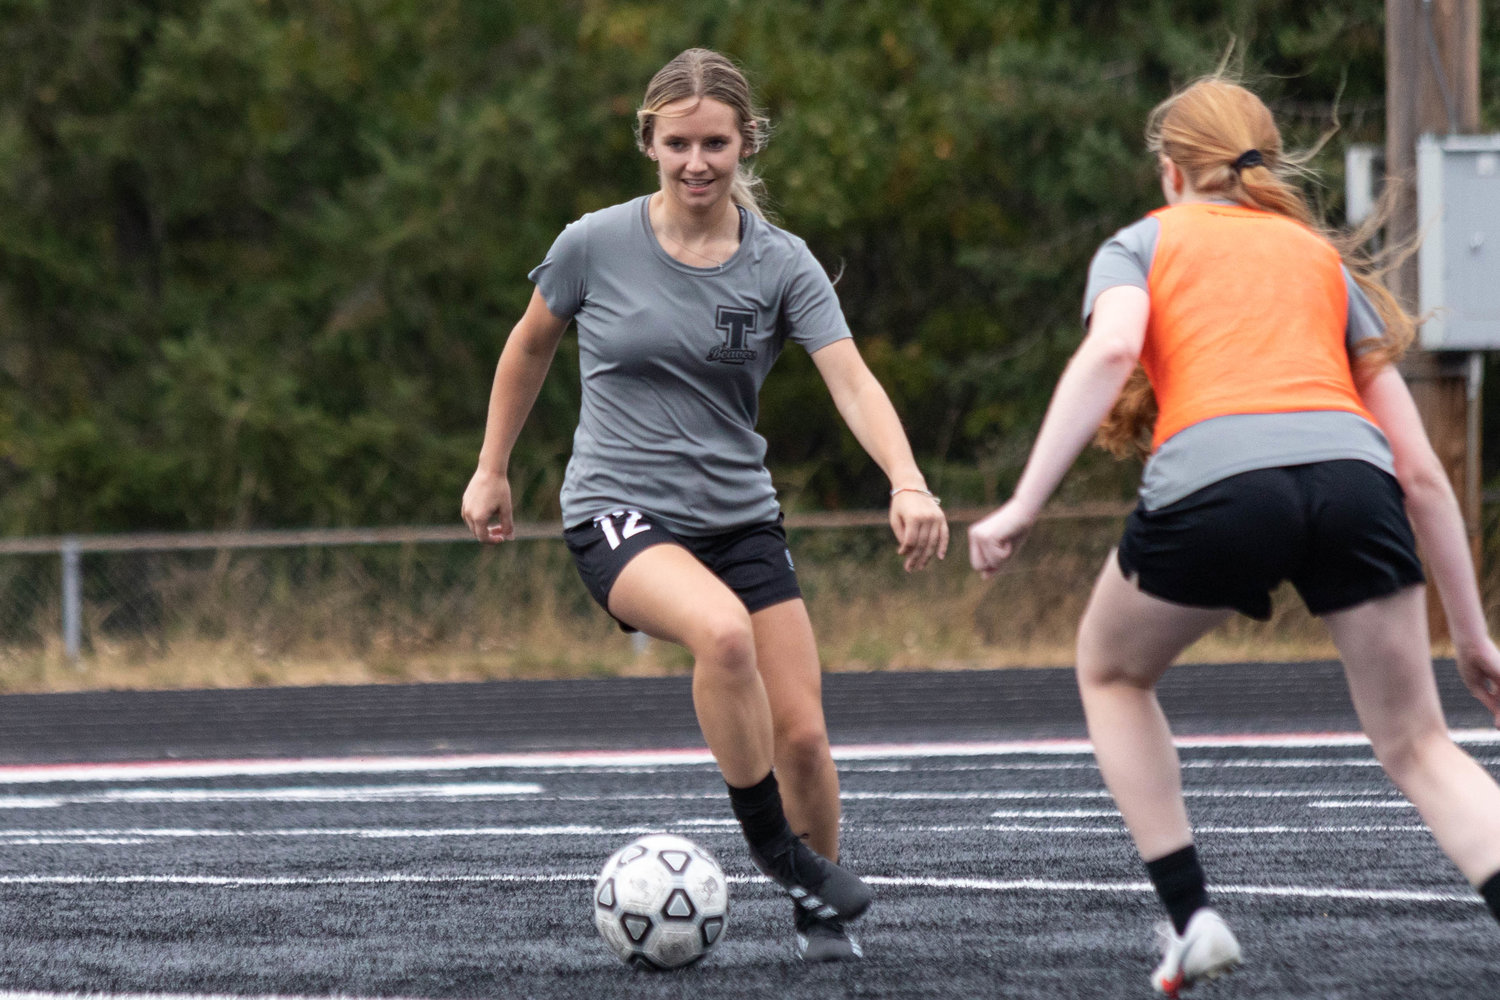 Senior Grace Vestal (left) is defended by Andee Schaffran (right) at Monday afternoon's Tenino practice.